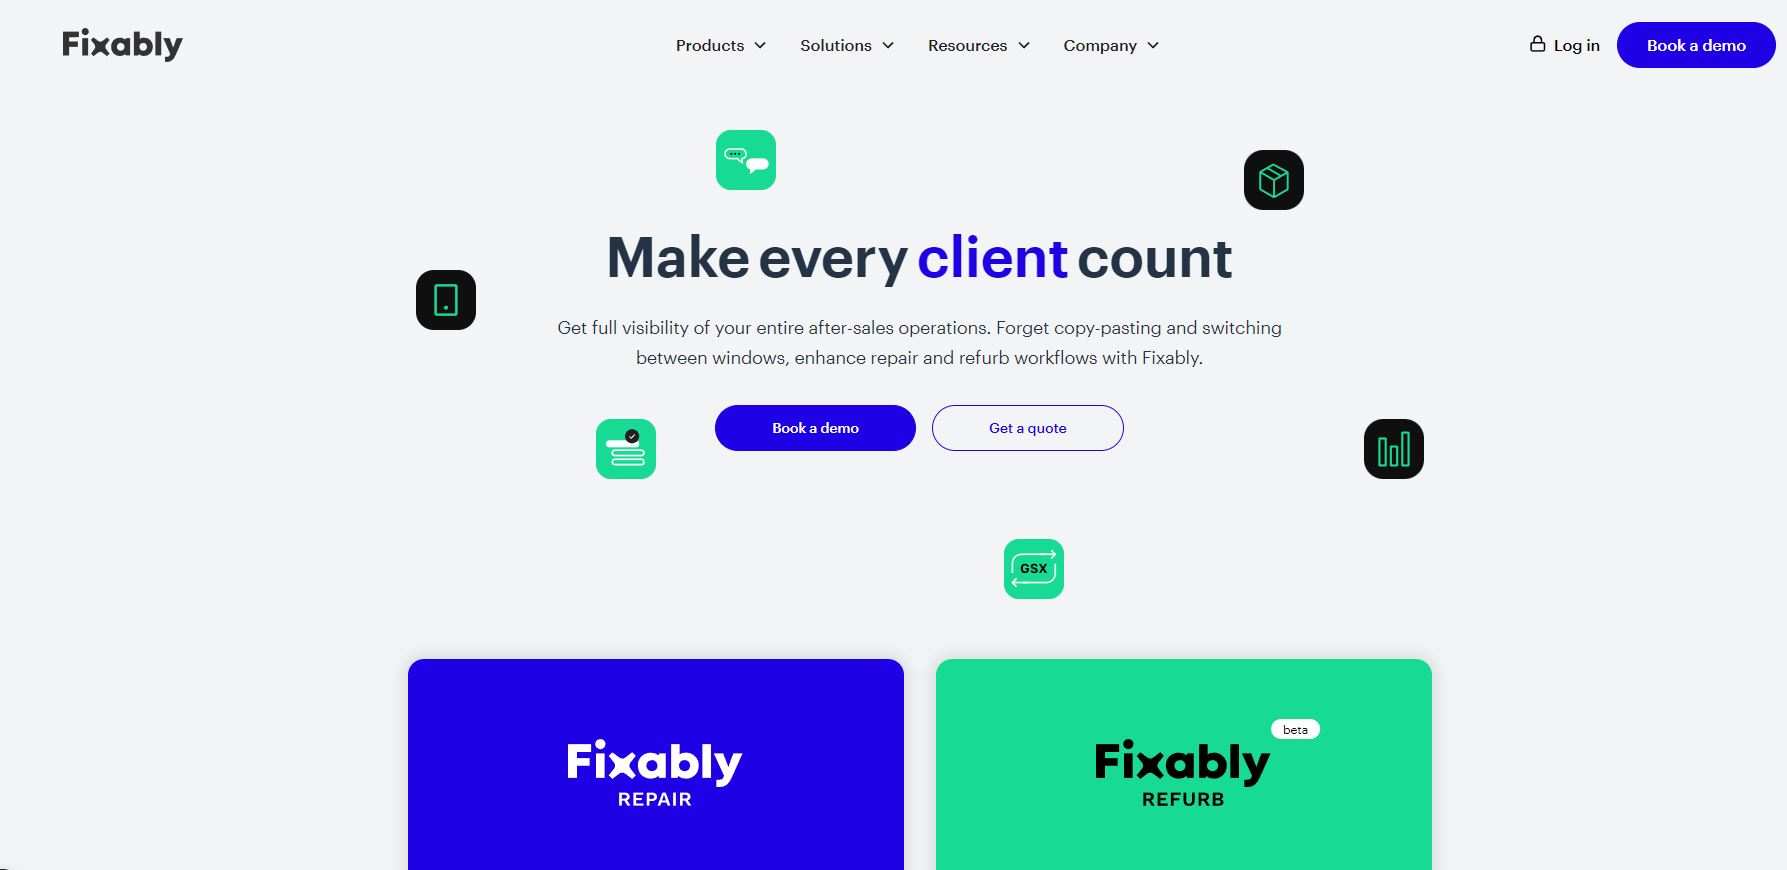 With an impressive $10 million in funding, Fixably is revolutionizing the after-sales industry and making every client count